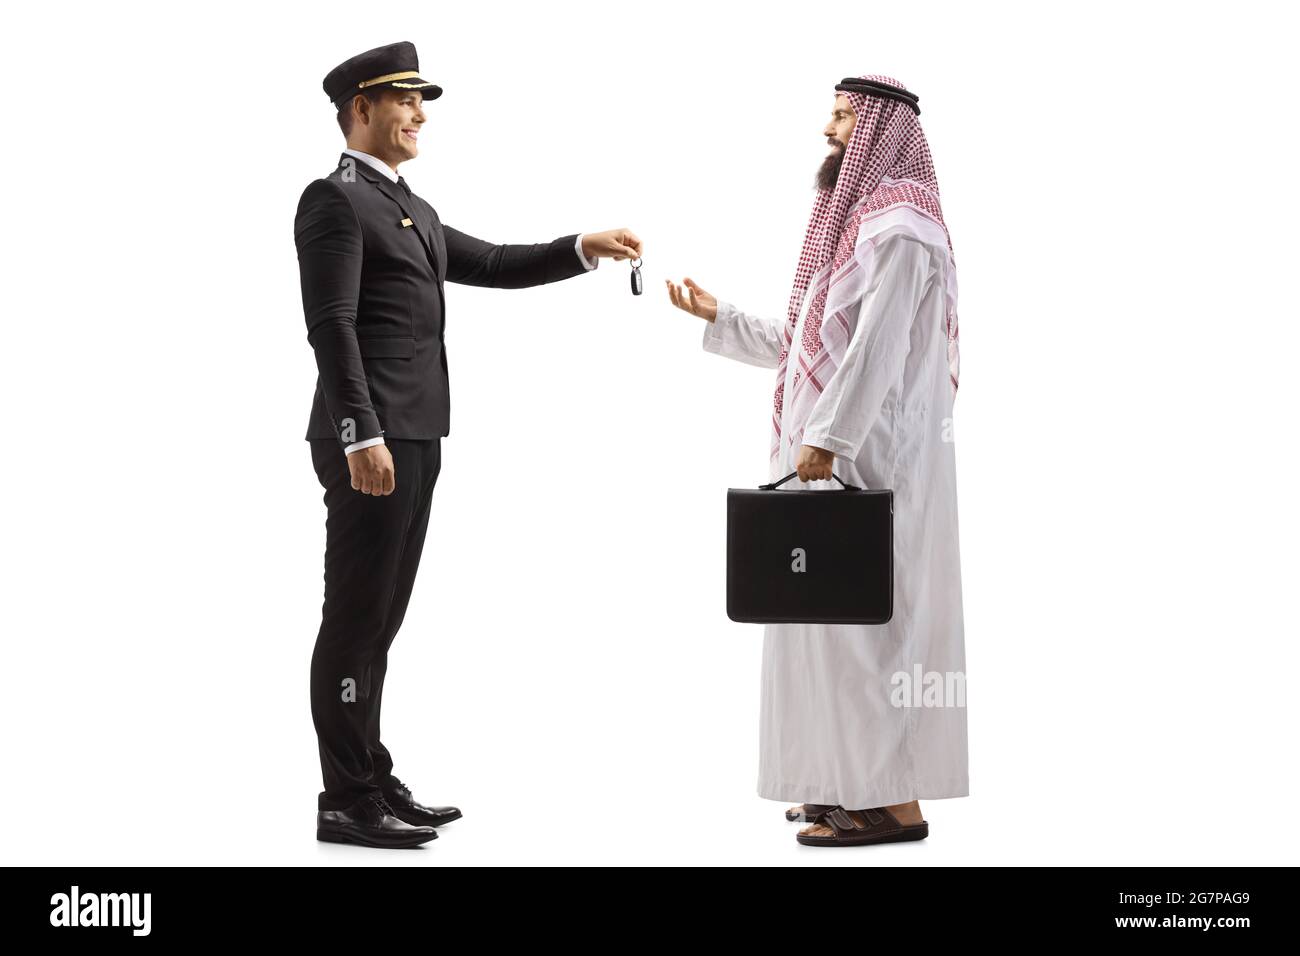 Full length profile shot of a chauffeur giving car keys to a saudi arab man isolated on white background Stock Photo